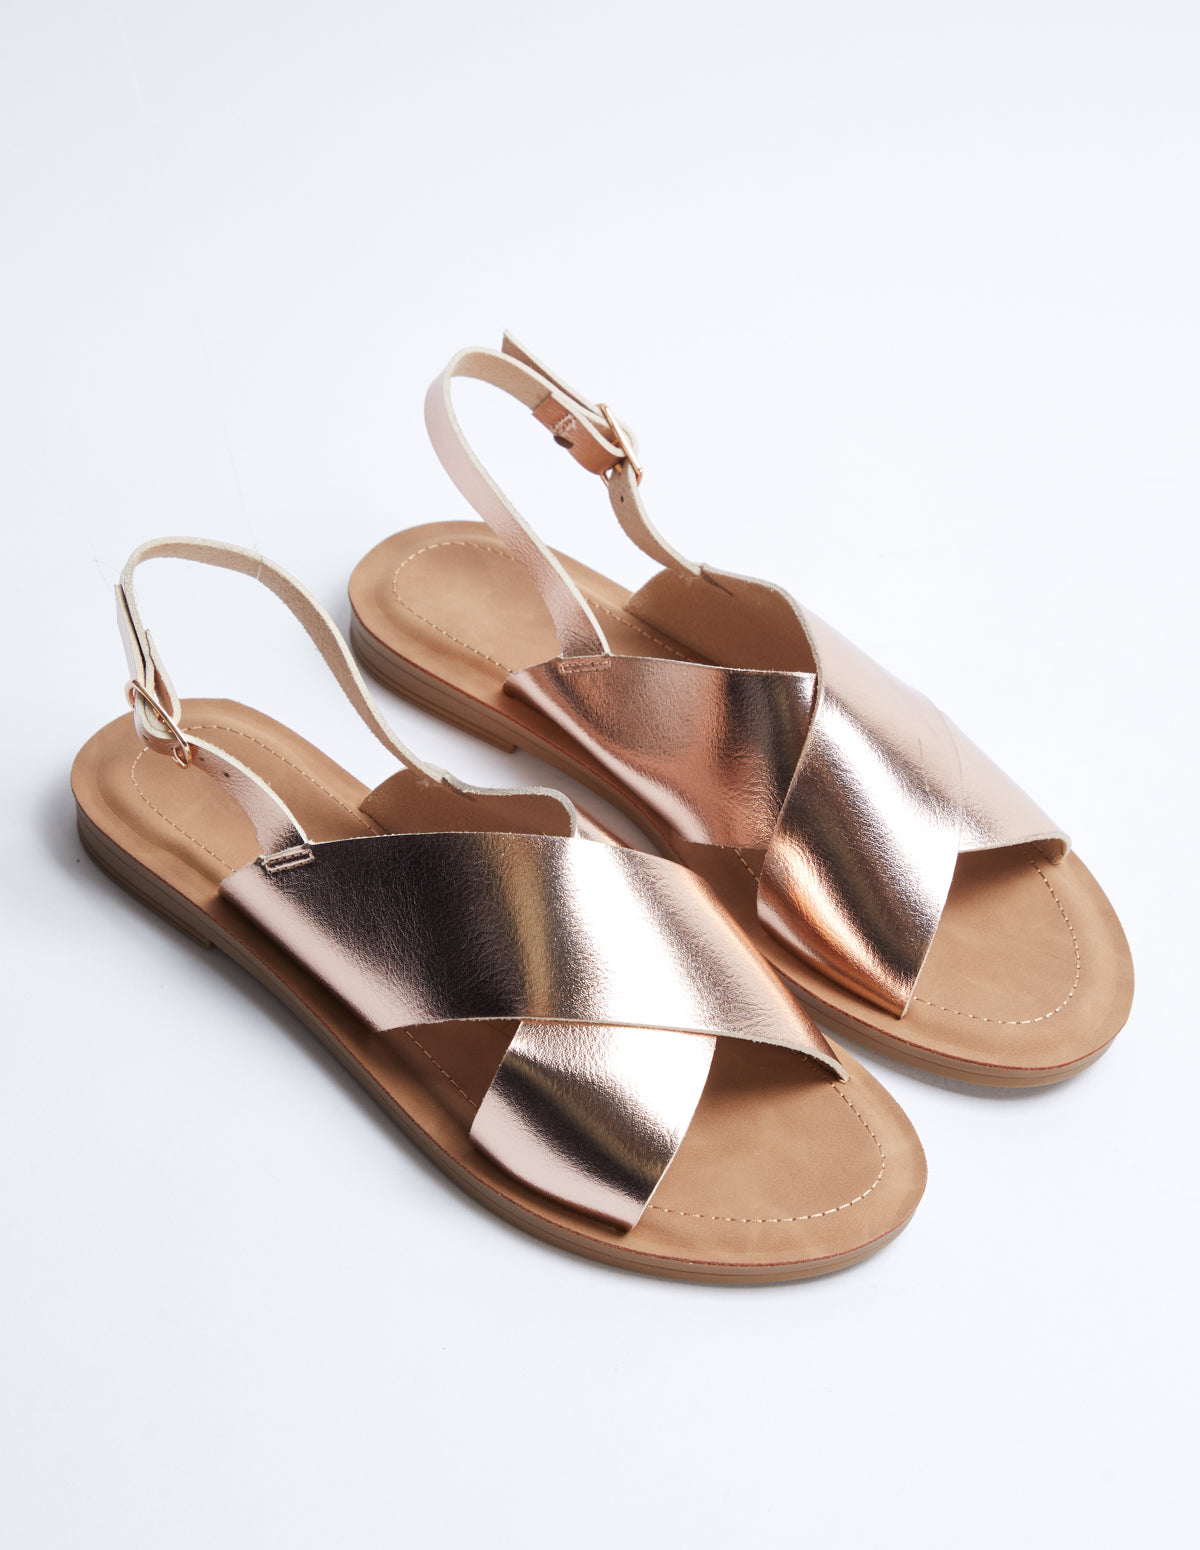 Crossover Strap Sandals - UK 3 (EU 36) / Champagne from Blue Vanilla